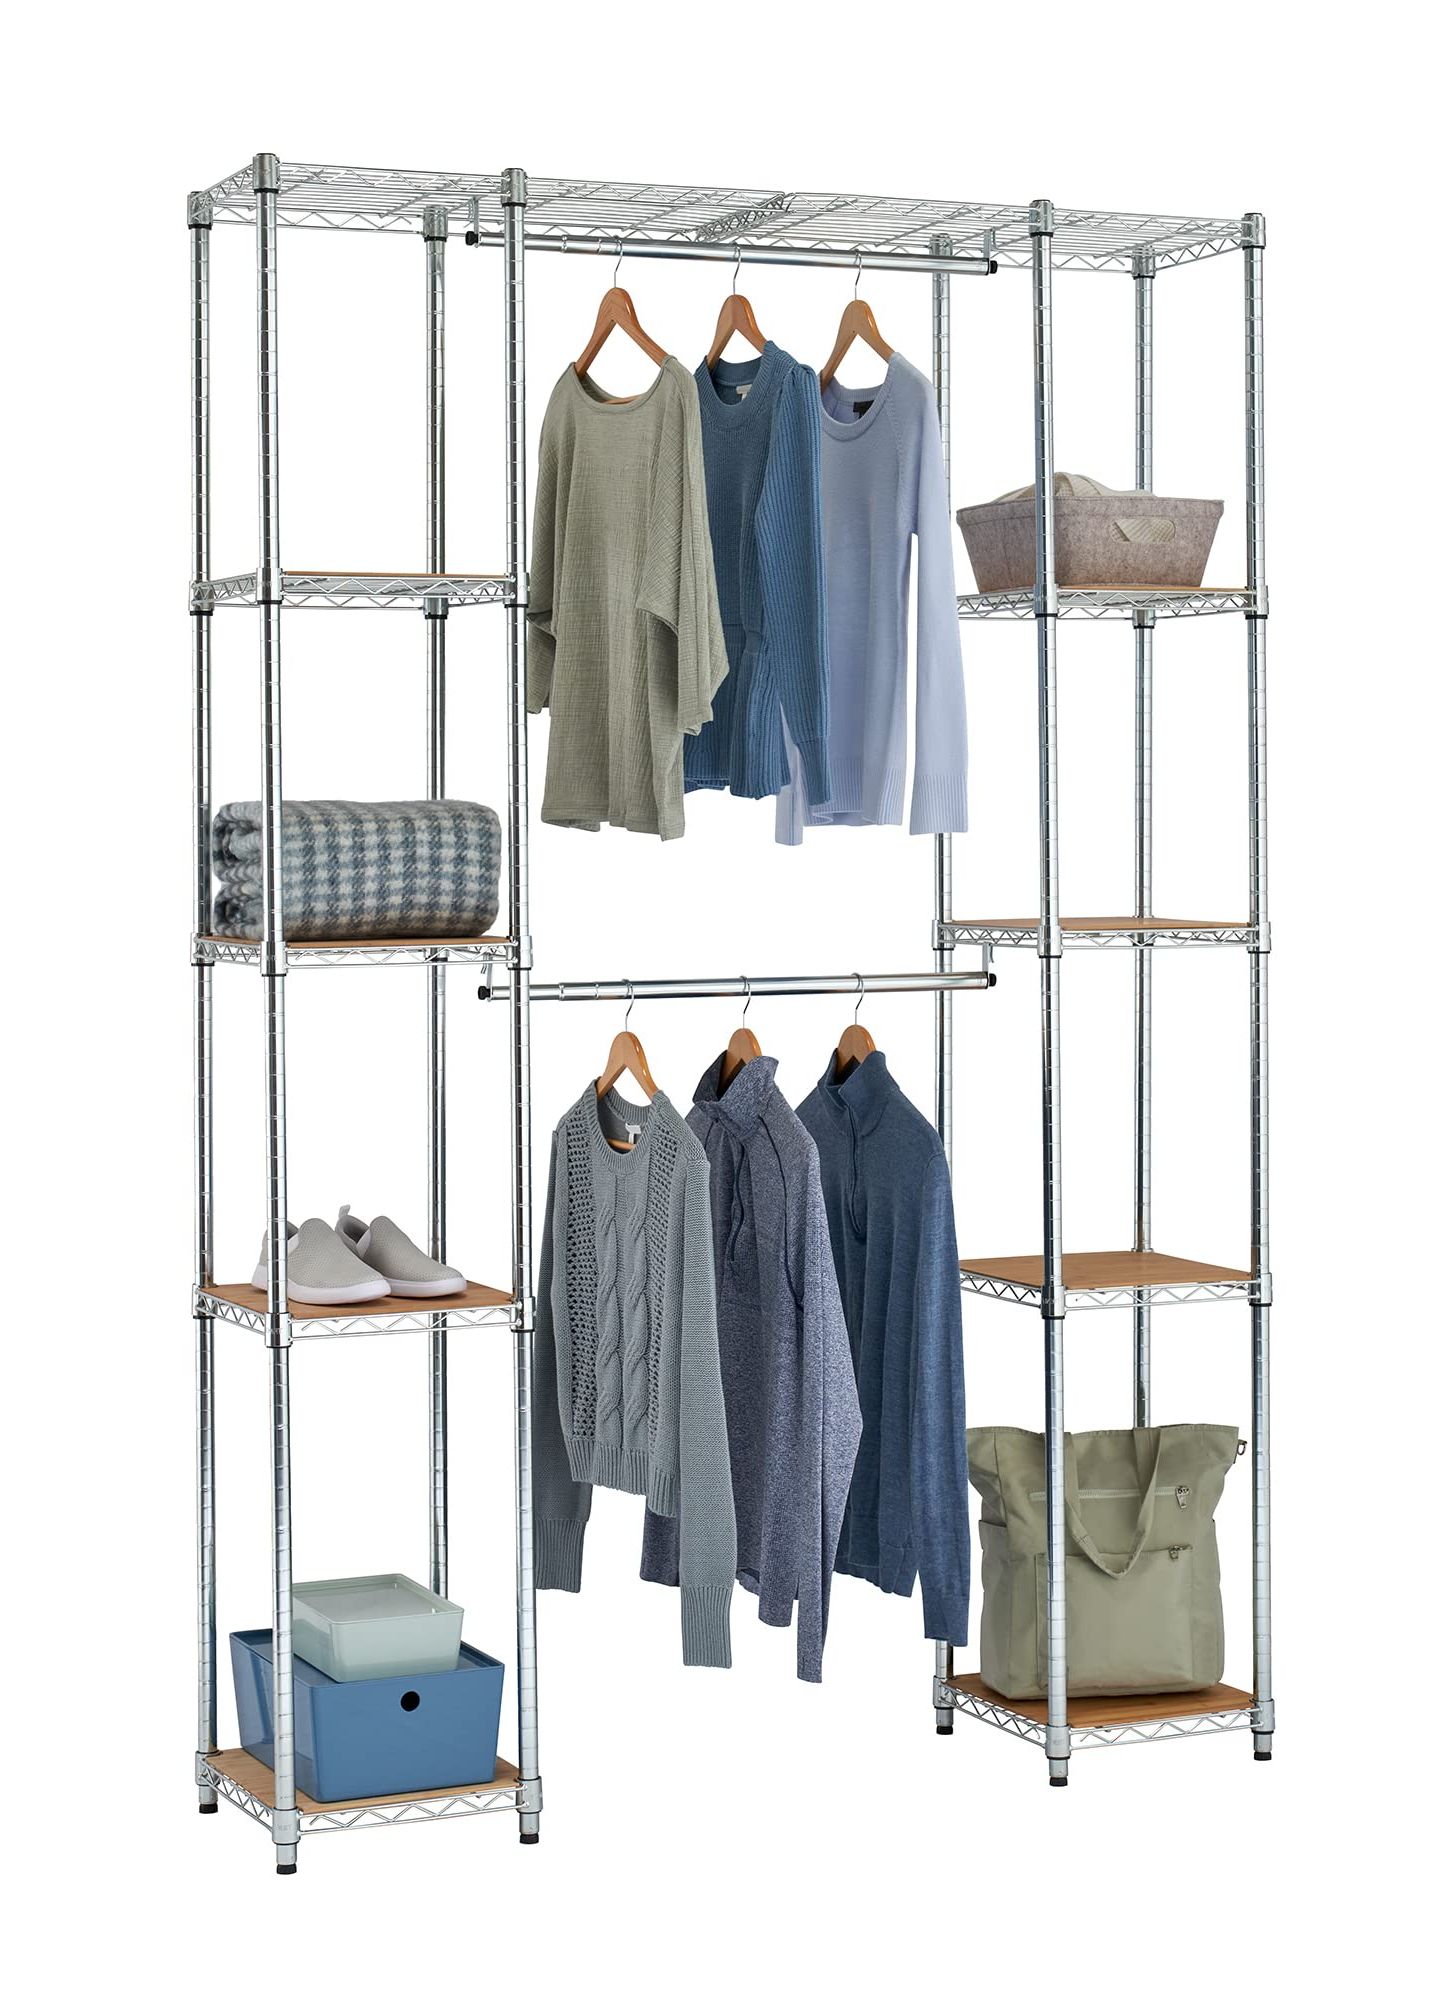 2017 Amazon: Trinity Ecostorage Expandable Garment Rack With Bamboo Shelves  For Clothing Storage, Closet Organization For Home, Apartment, Dorm Room  And More, Chrome, 56 76” W X 14” D X 84” H : Everything Else Throughout Chrome Garment Wardrobes (View 3 of 10)